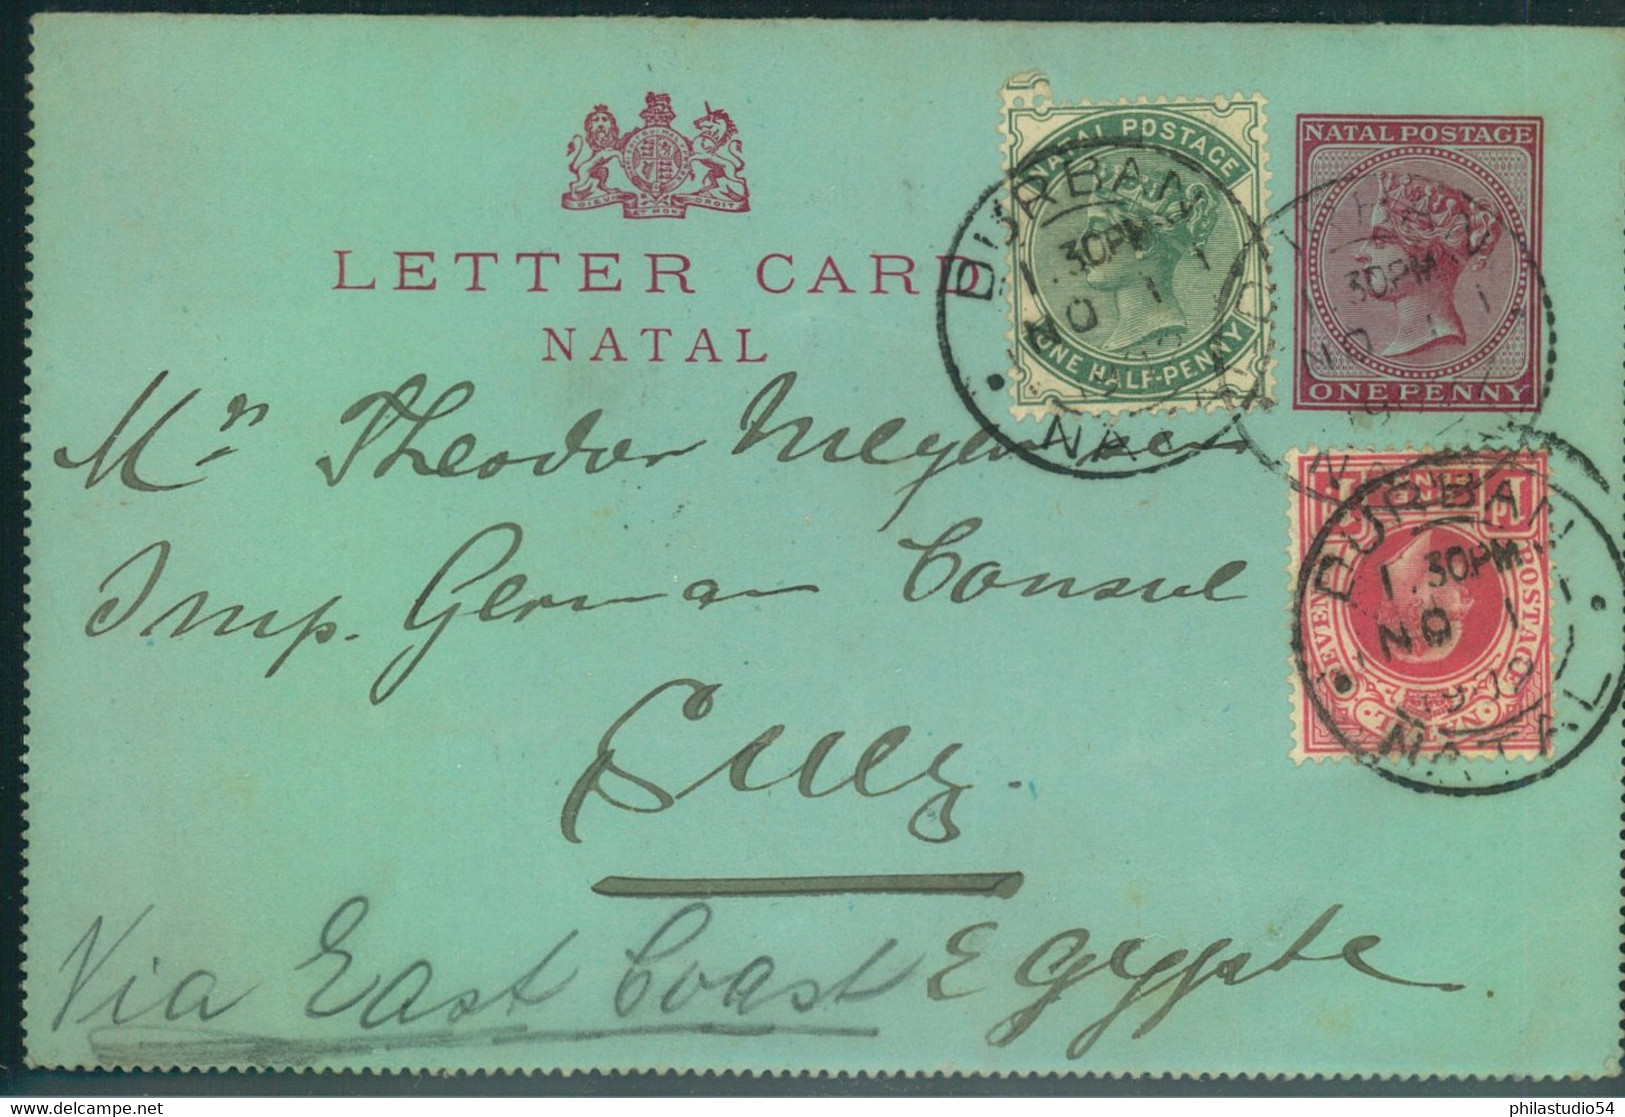 1902, Uprated Card Leter DUrBAN To SUEZ - Natal (1857-1909)